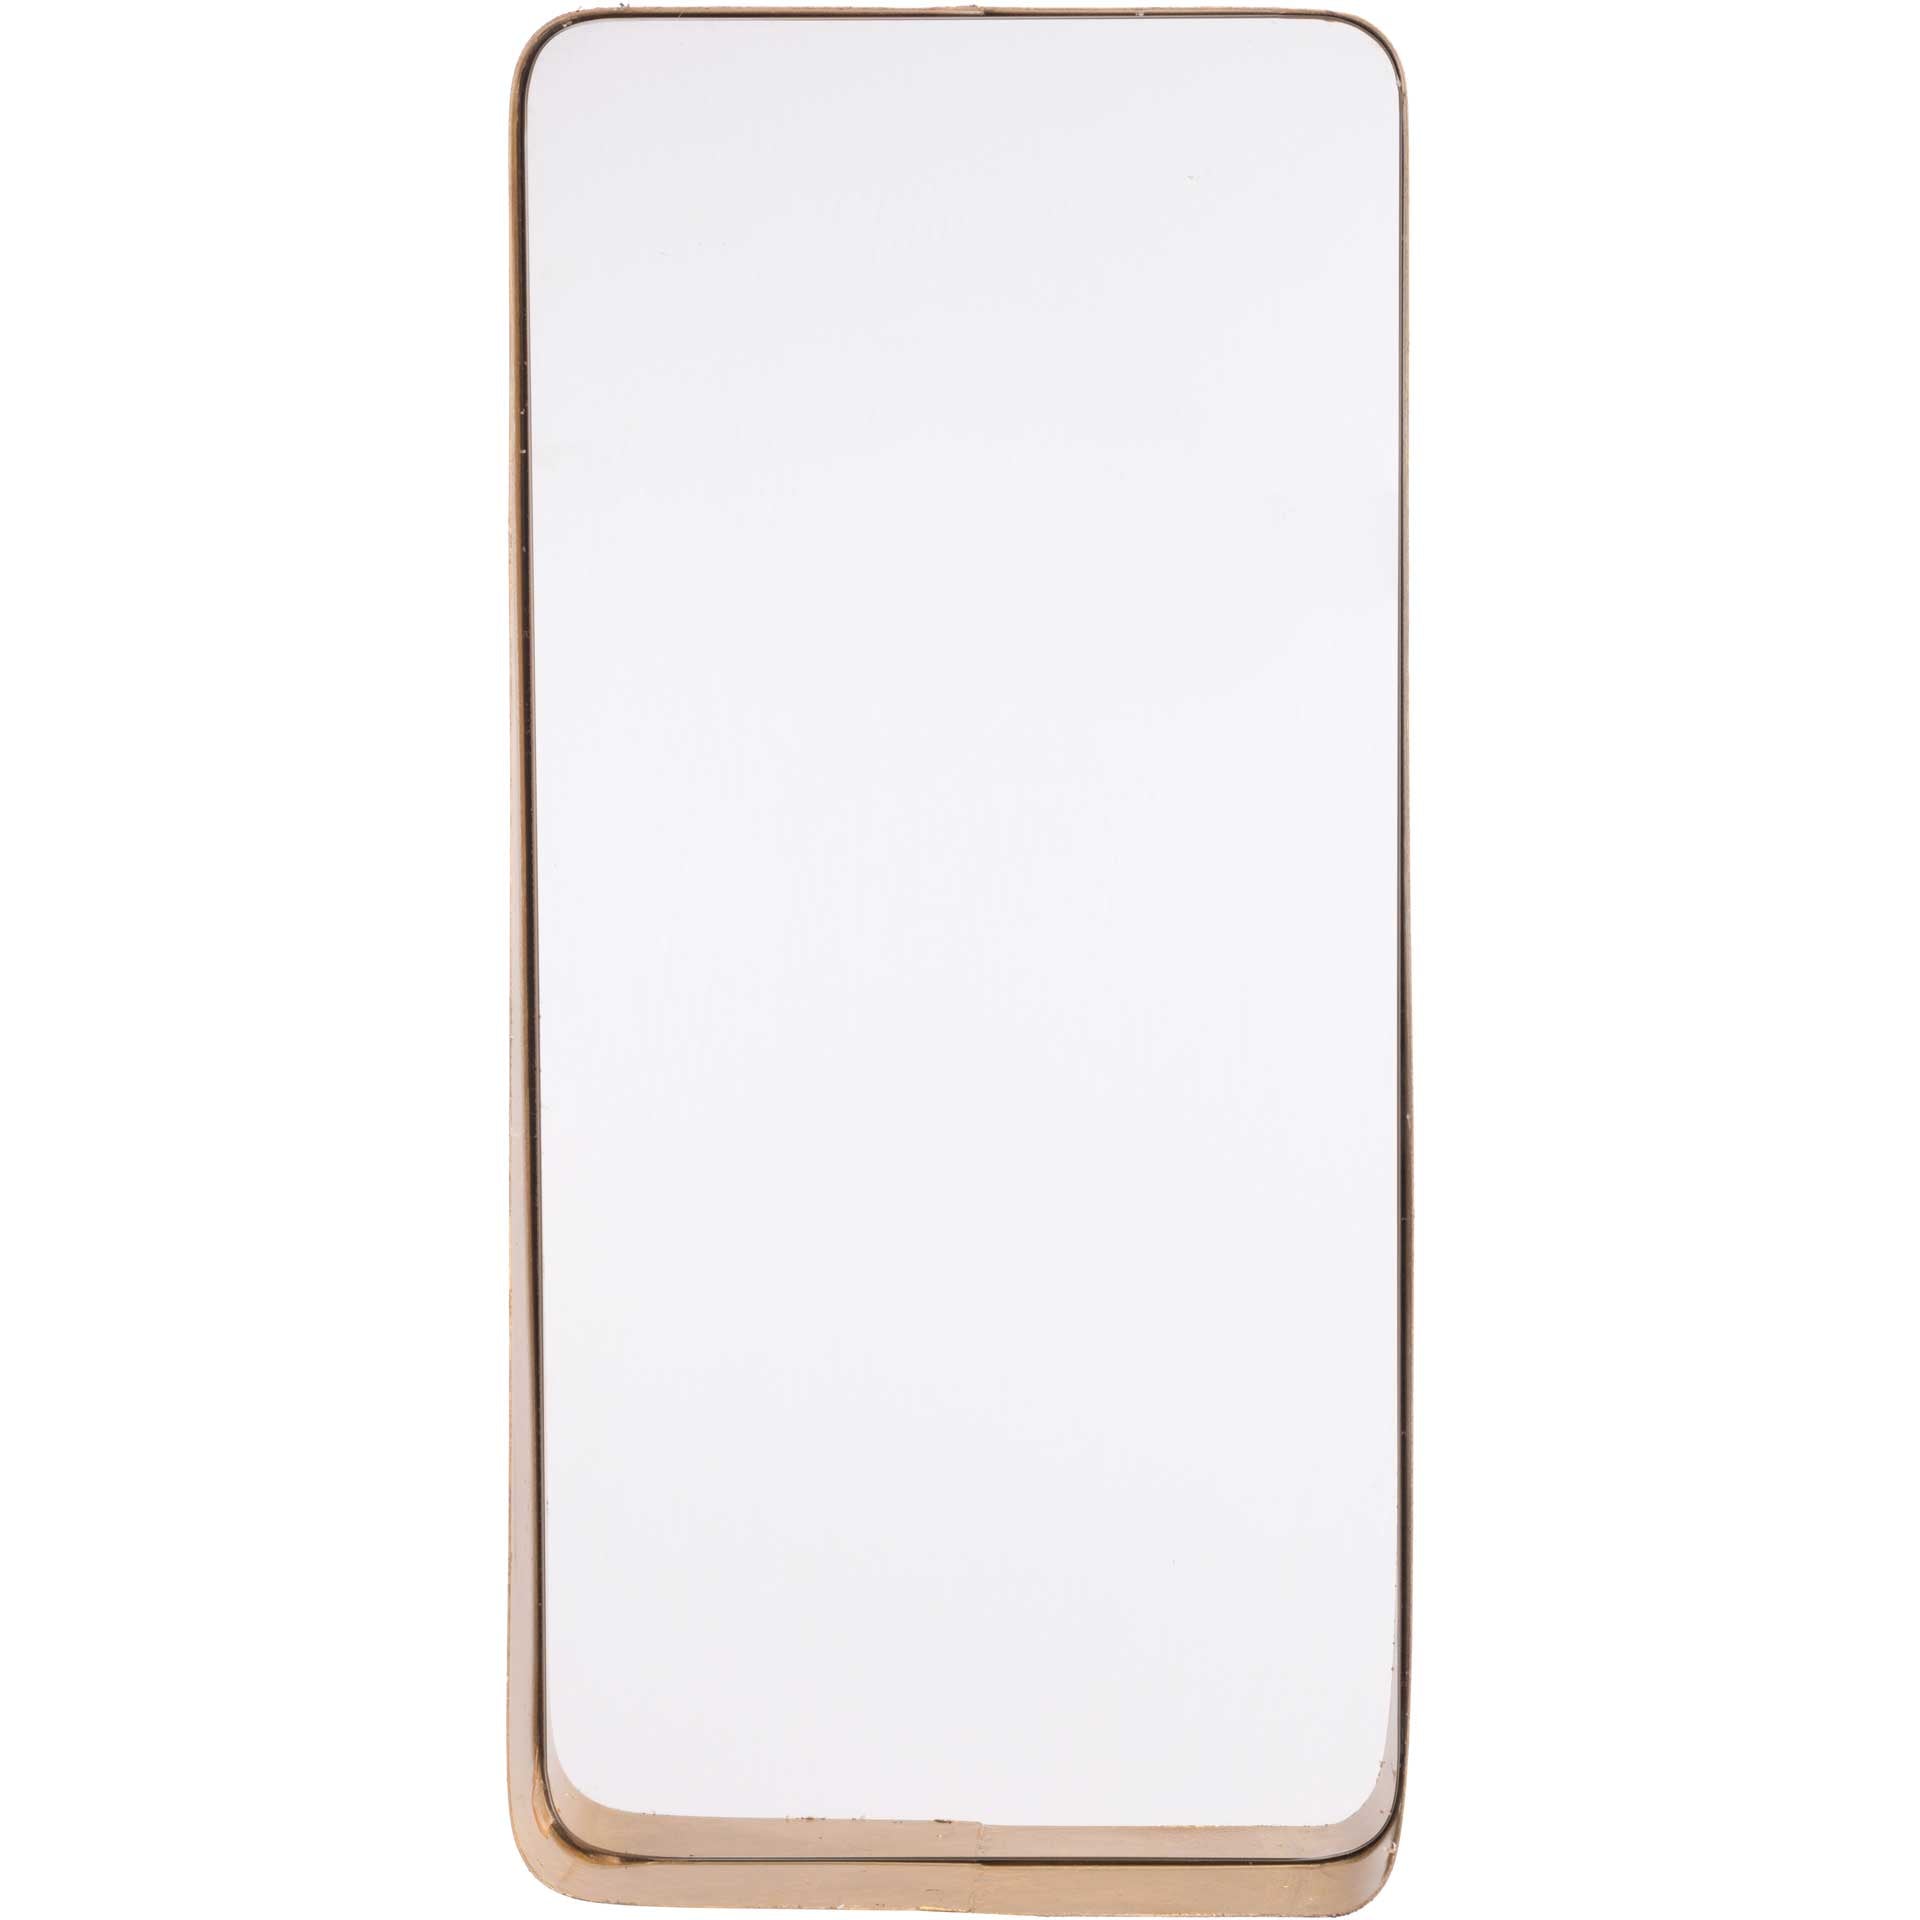 Sloping Tall Mirror Gold